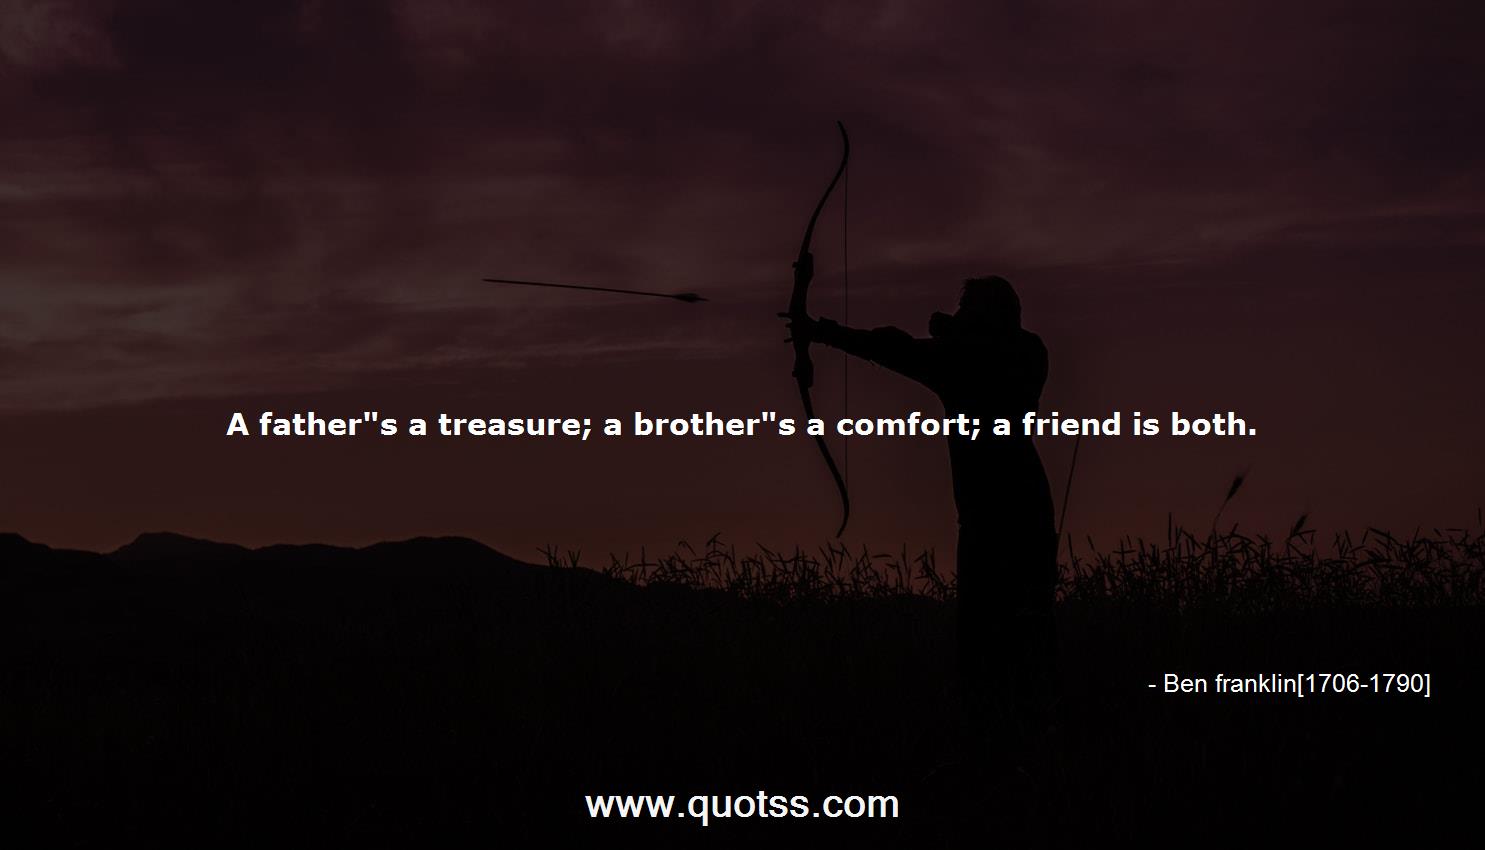 Ben franklin[1706-1790] Quote on Quotss